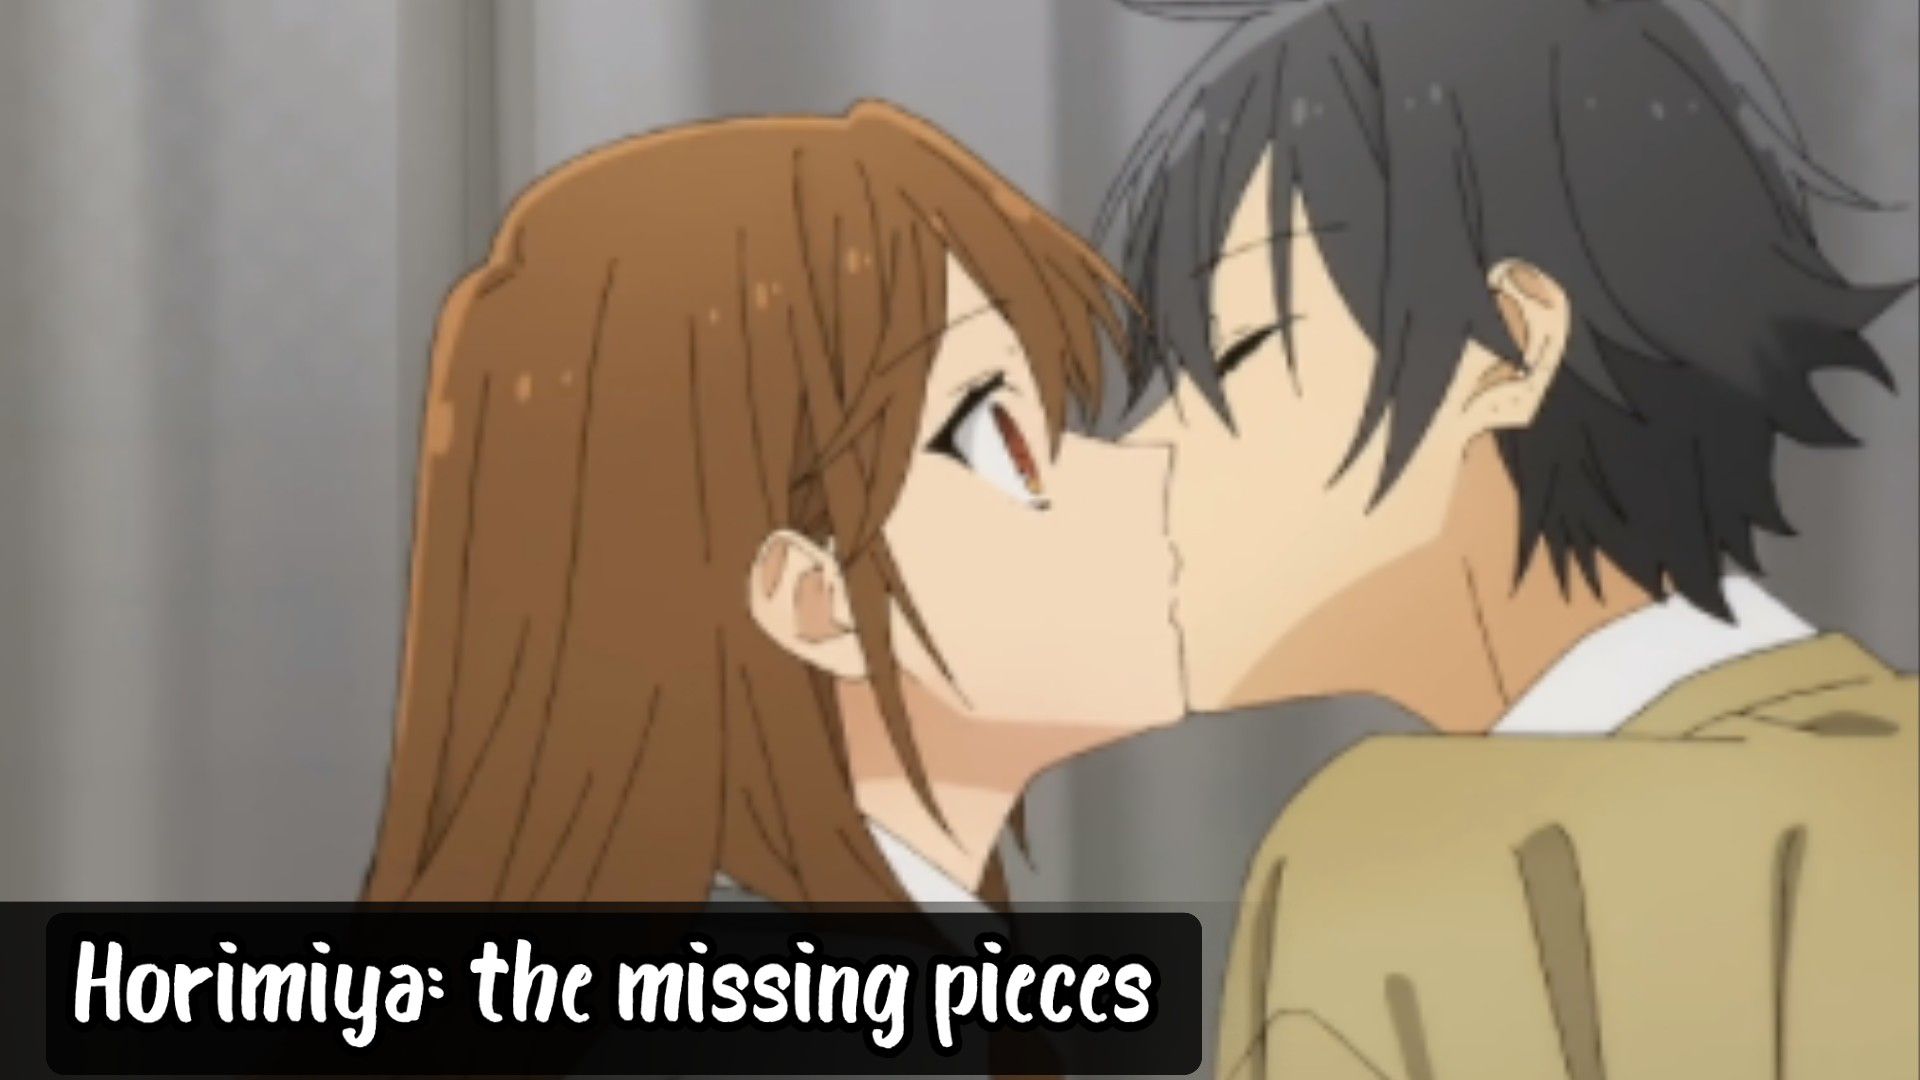 Anime Horimiya: The Missing Pieces HD Wallpaper